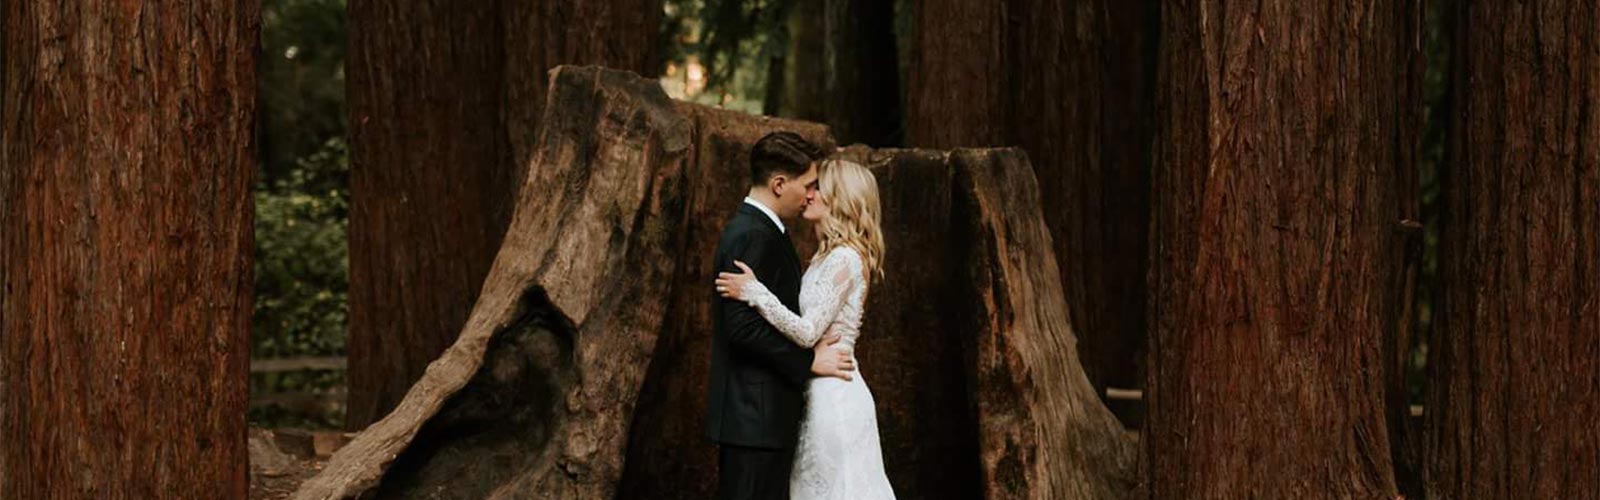 Wedding Photography in Forest